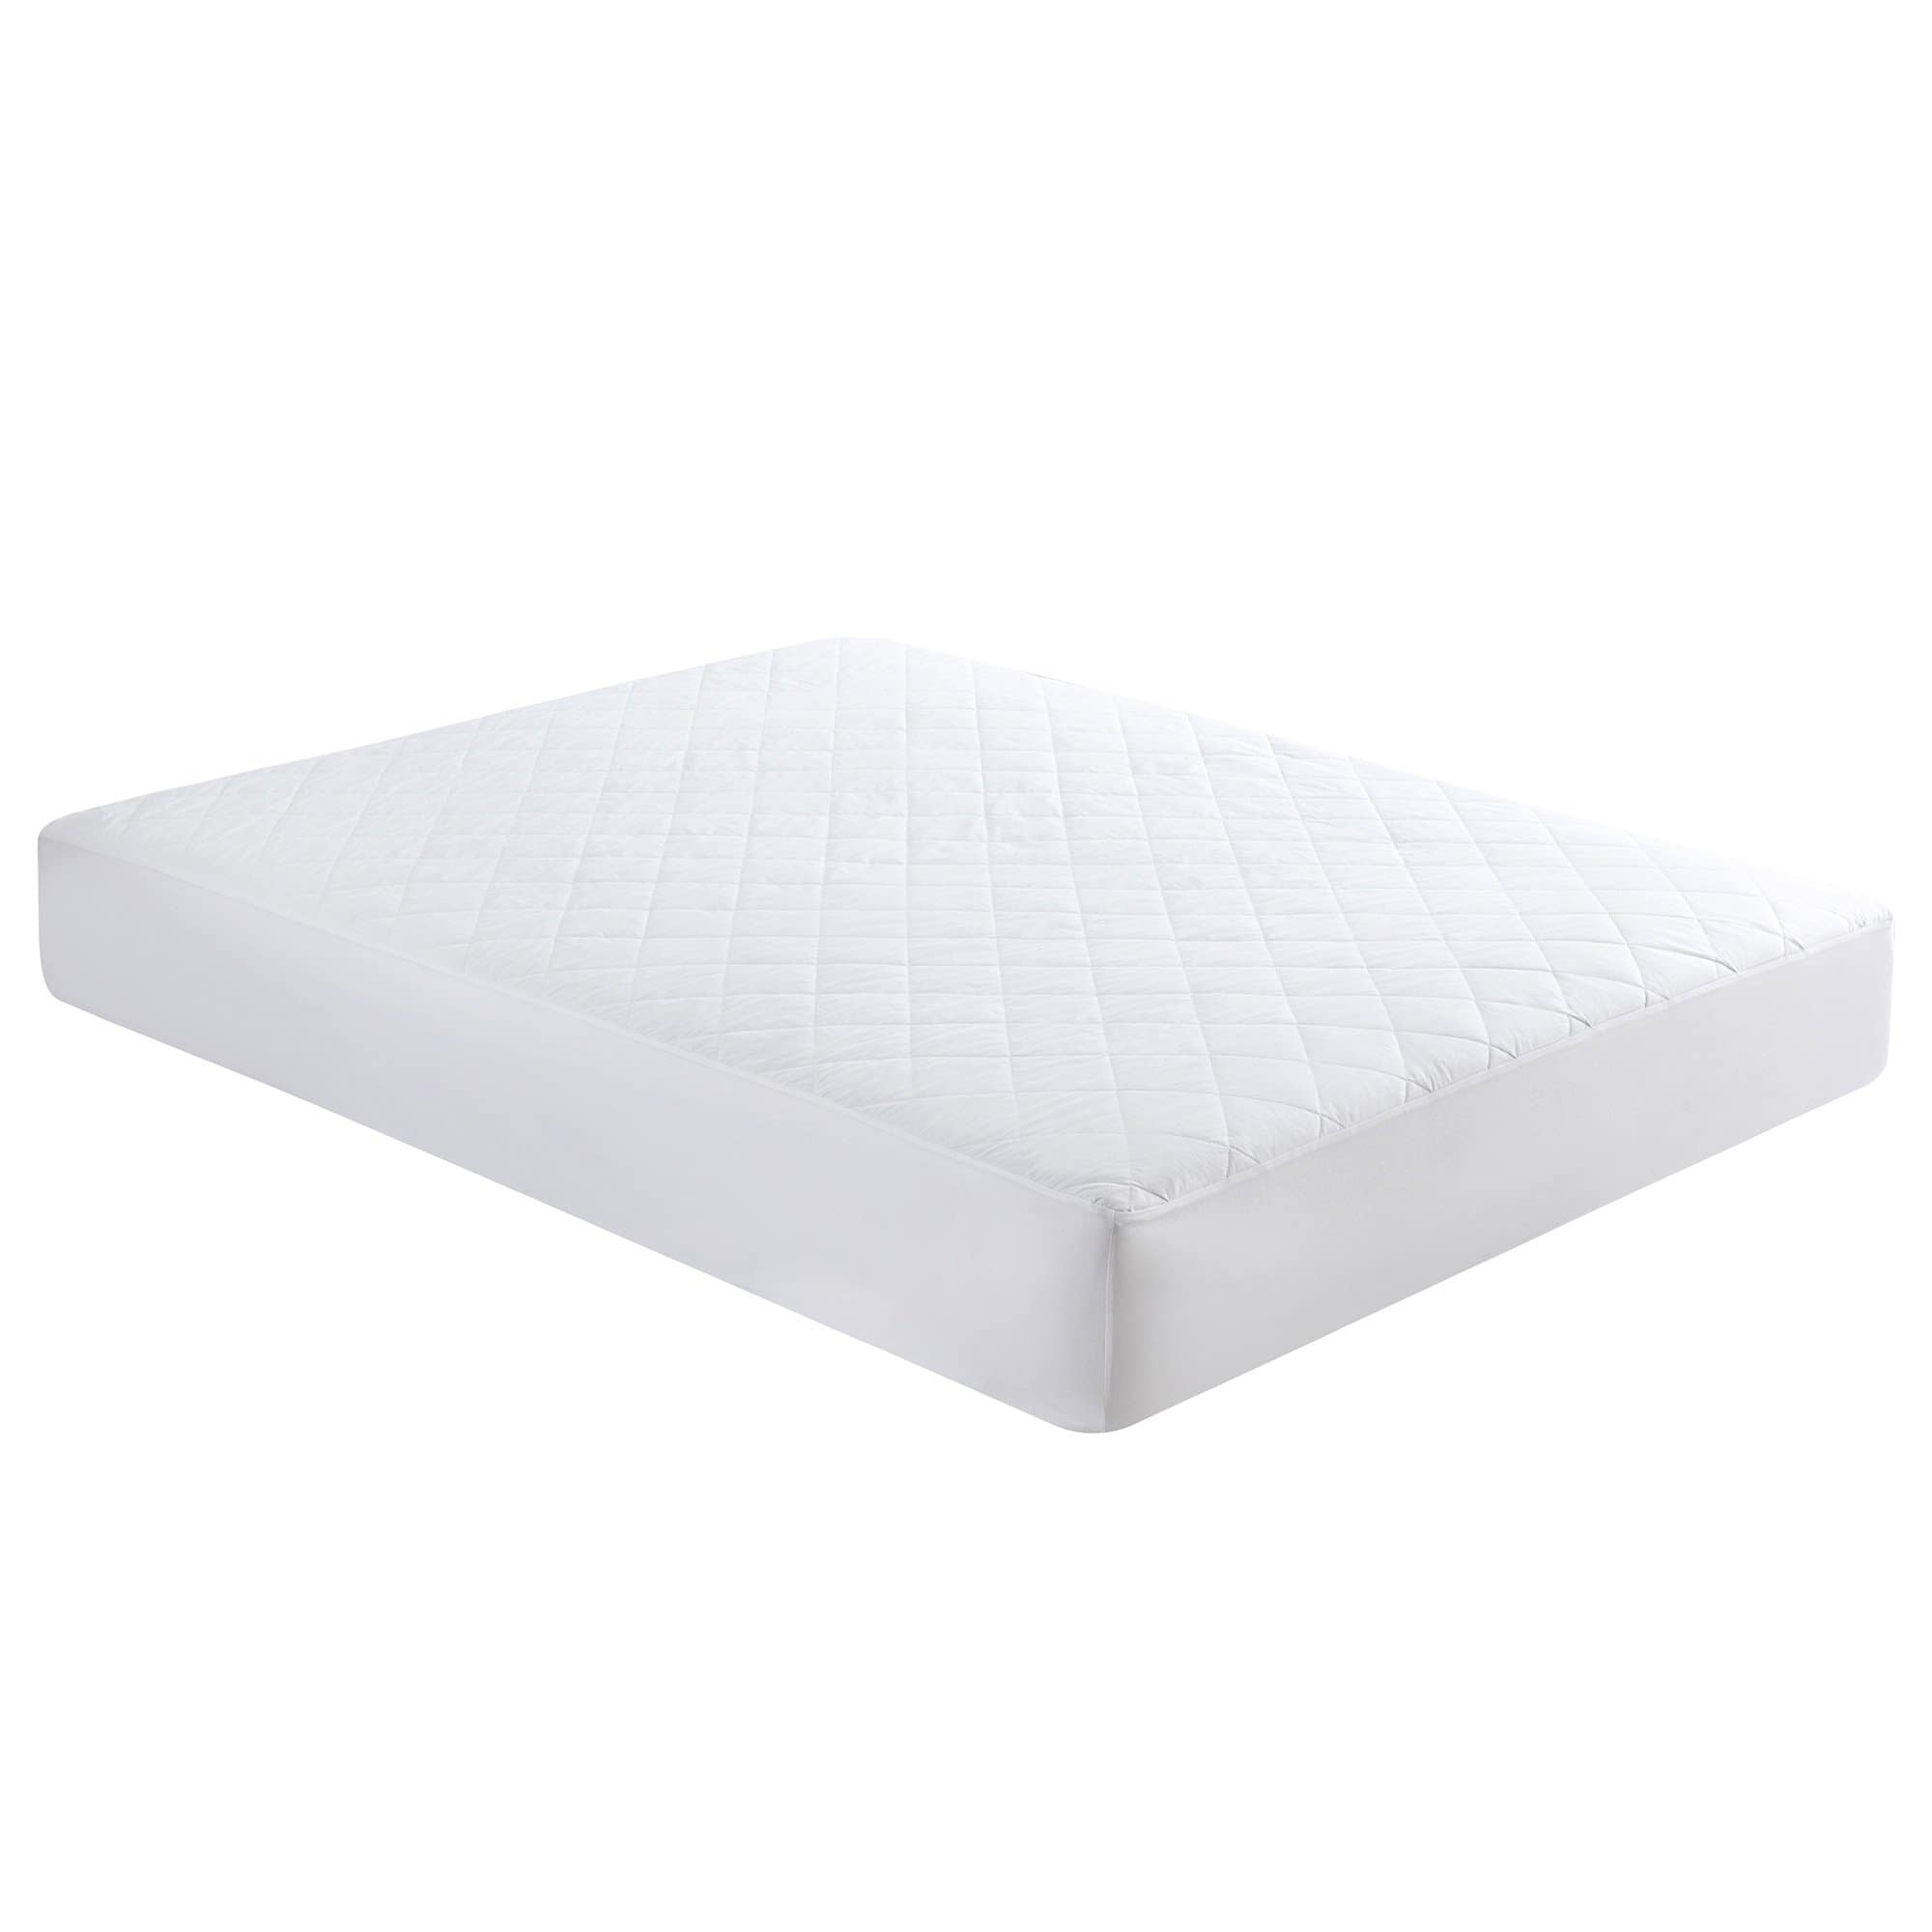 Soft Waterproof Quilted Down Alternative Mattress Pad Cotton Fabric ...